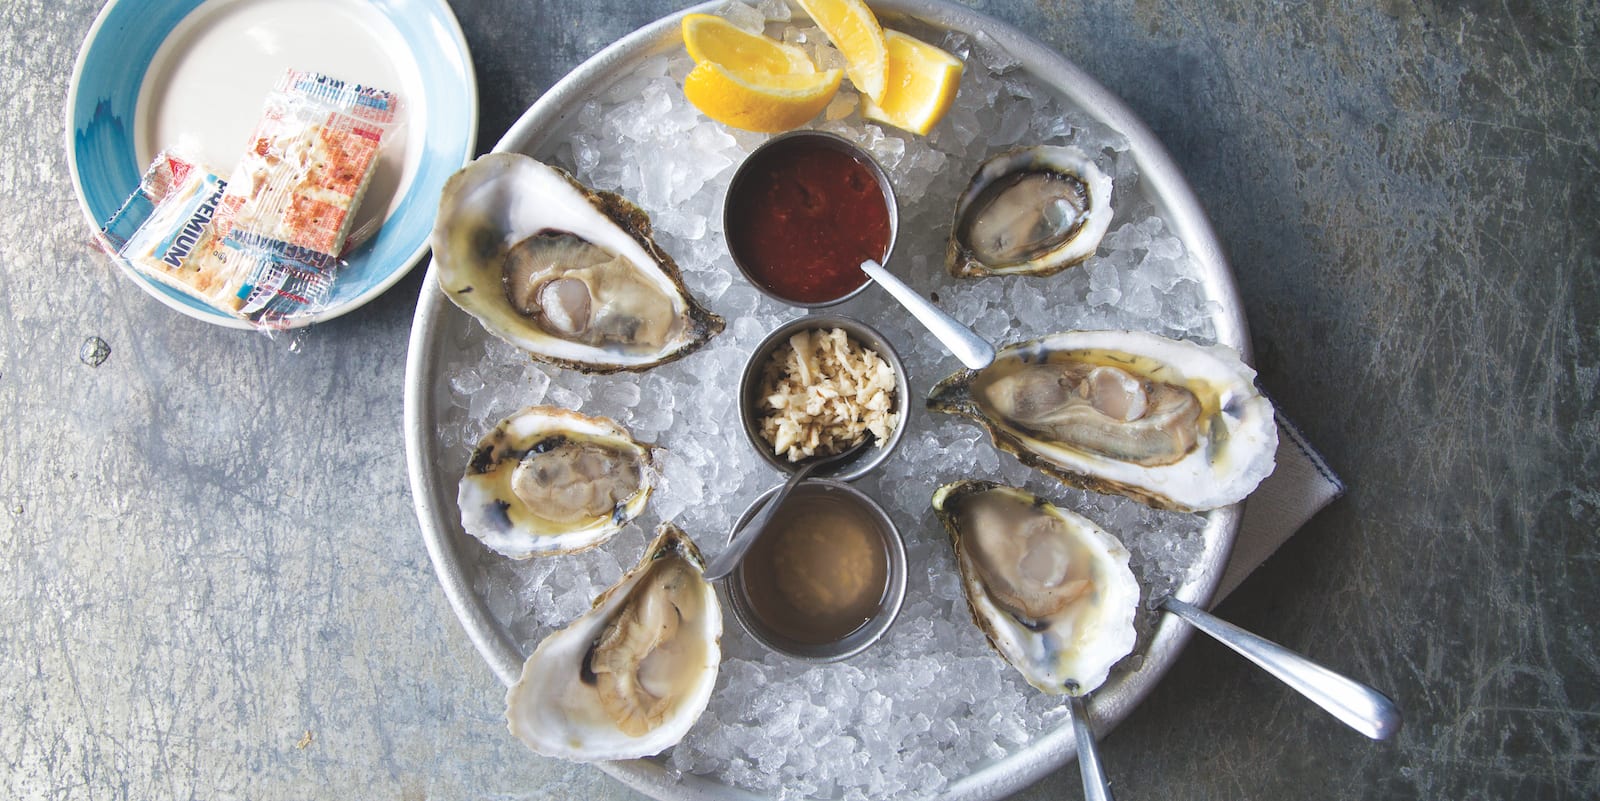 Learn how to shuck oysters at home to create this dreamy half dozen raw oysters on a plate of ice with cocktail sauce, mignonette, and horseradish.